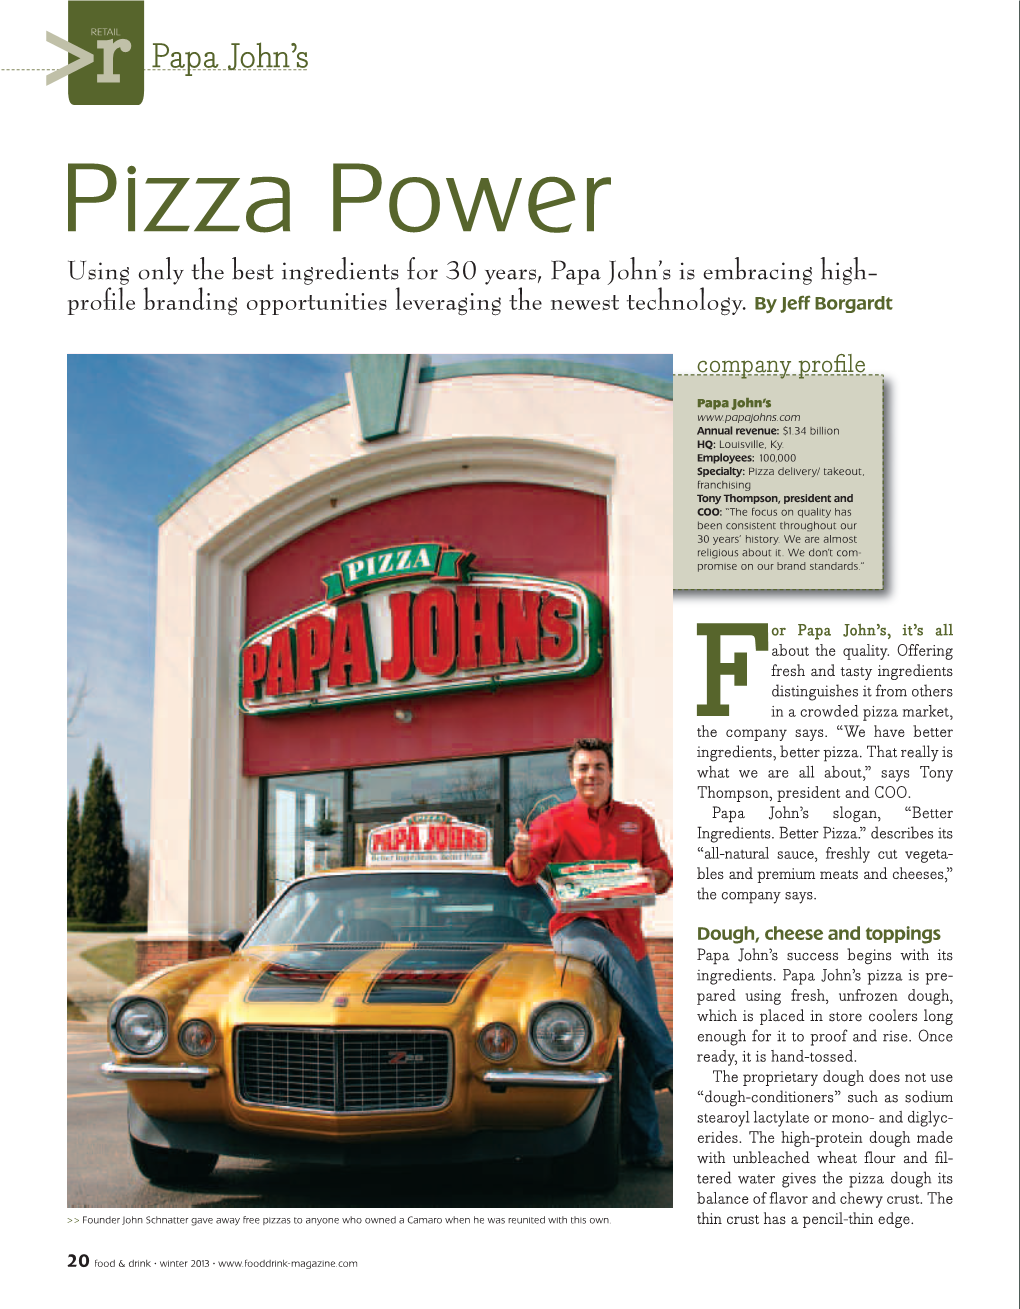 Pizza Power Using Only the Best Ingredients for 30 Years, Papa John’S Is Embracing High- Proﬁle Branding Opportunities Leveraging the Newest Technology